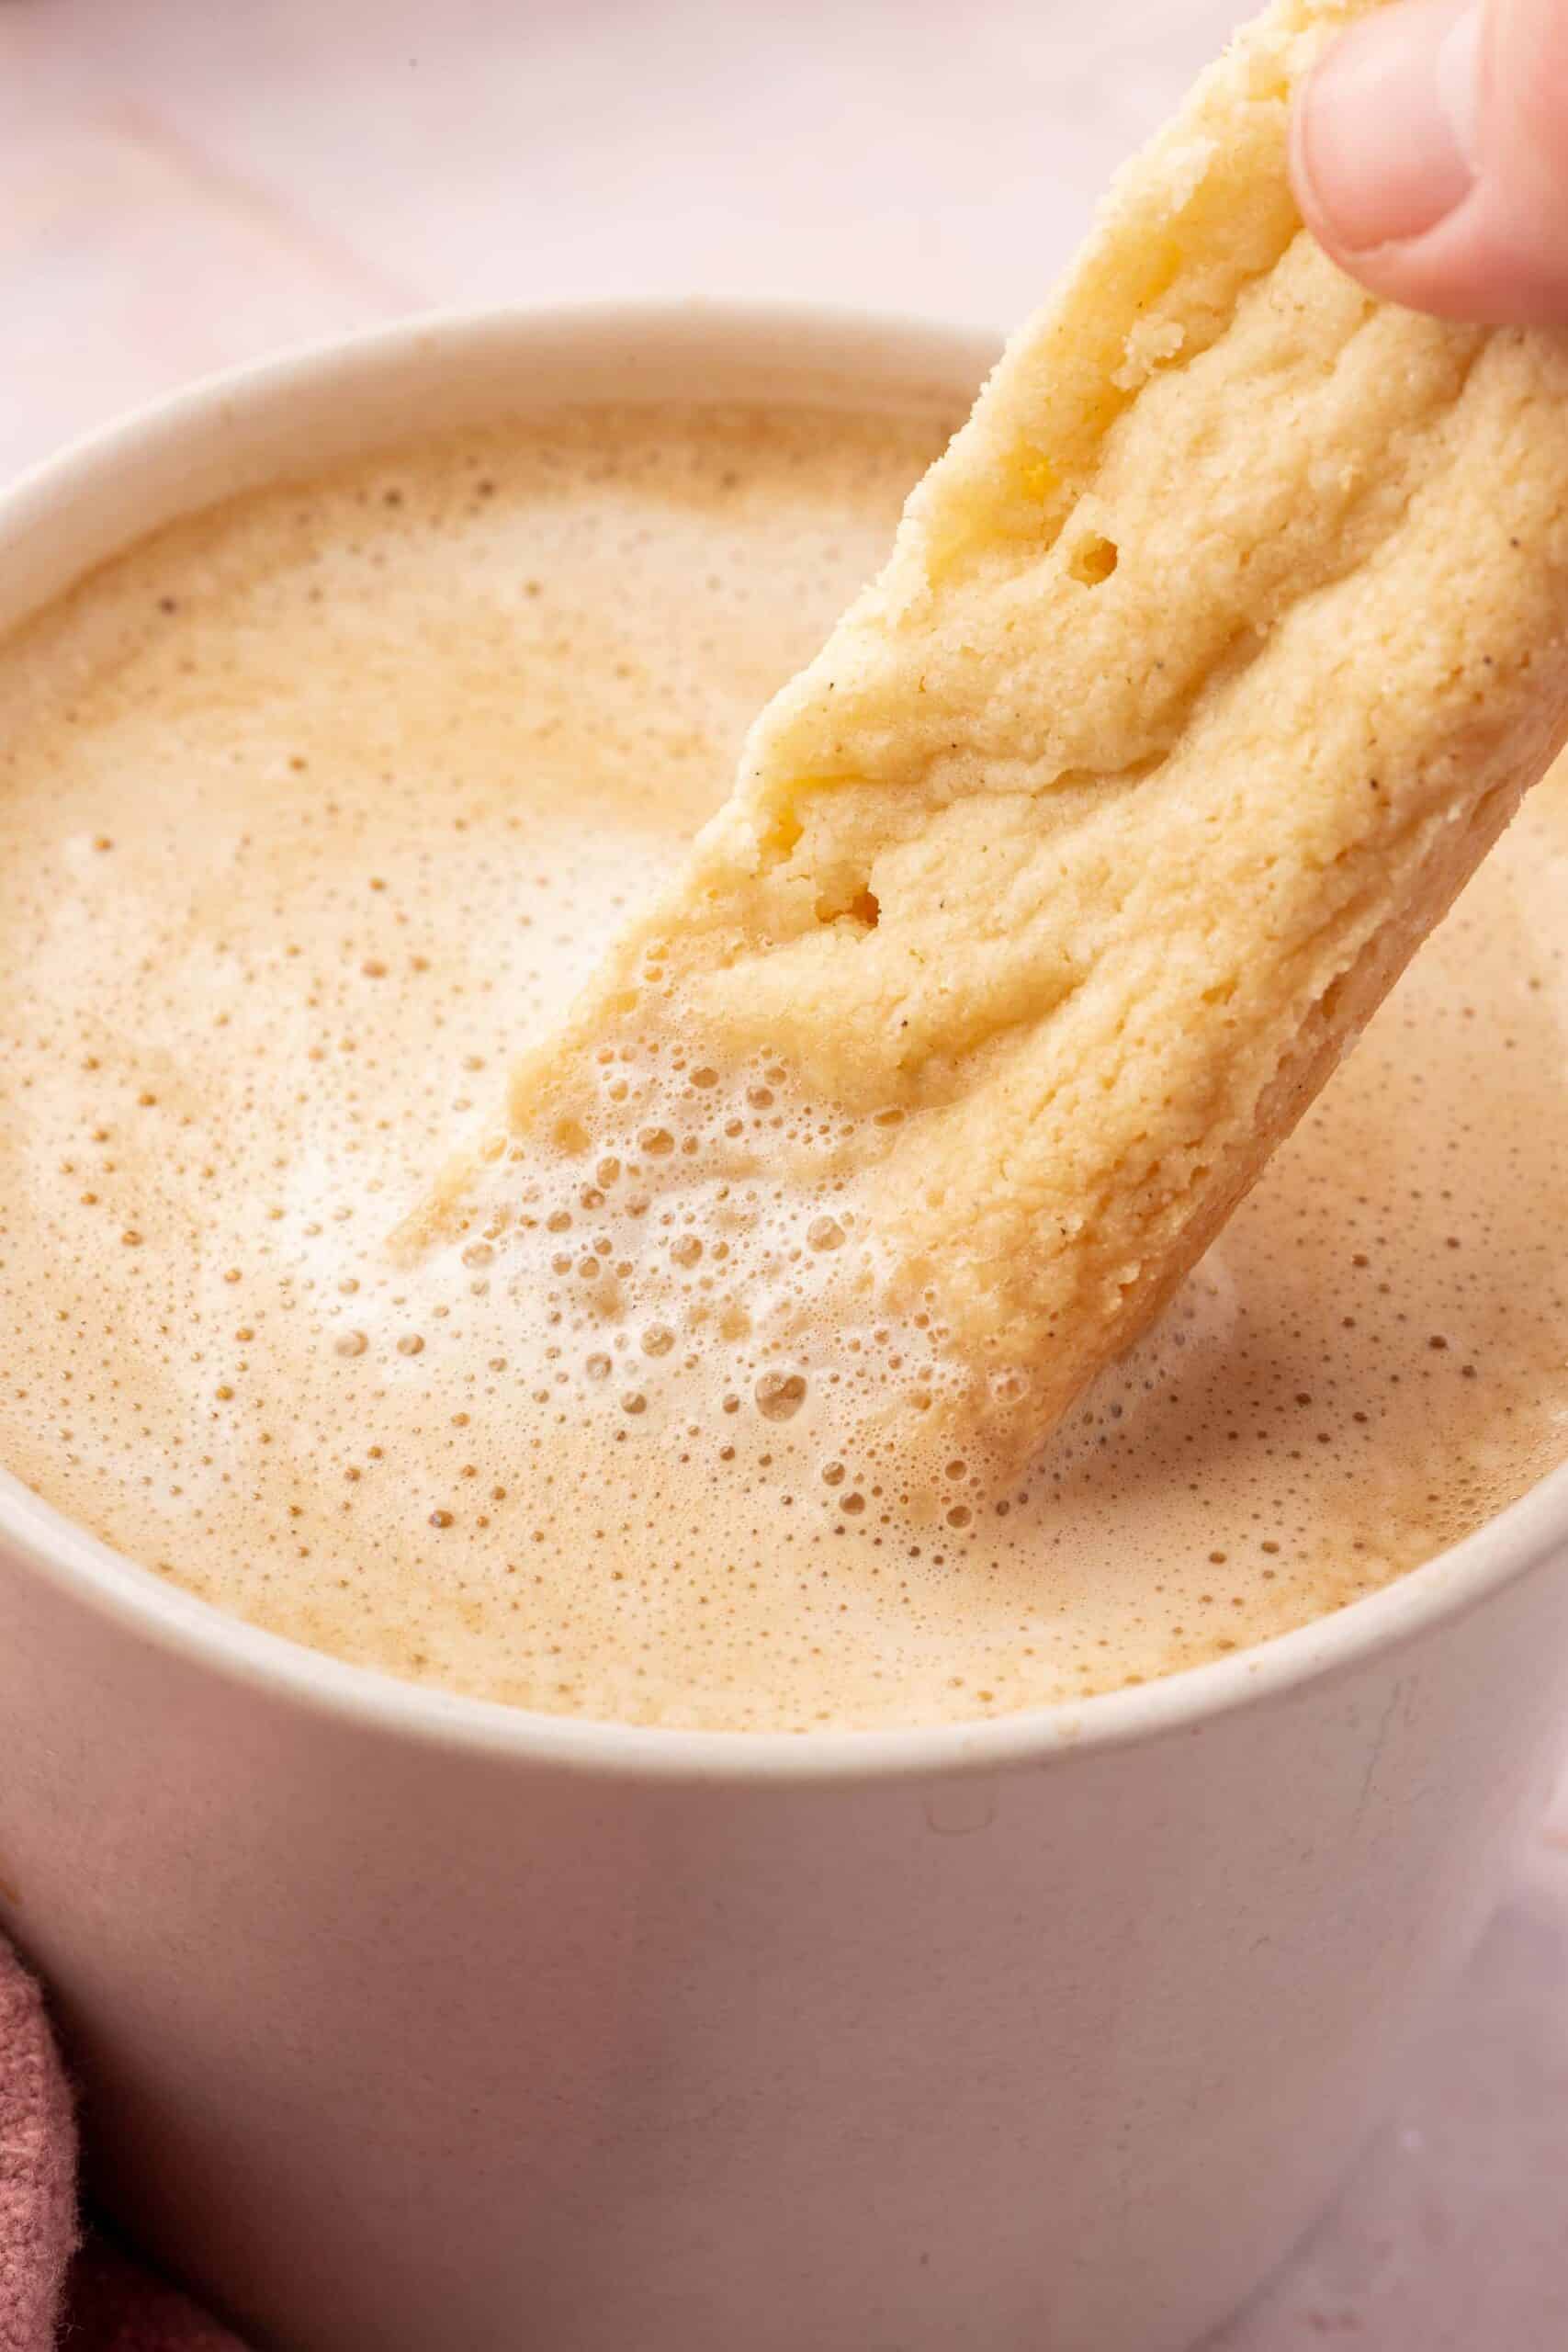 A close up of a slice of gluten-free shortbread being dipped into a latte.